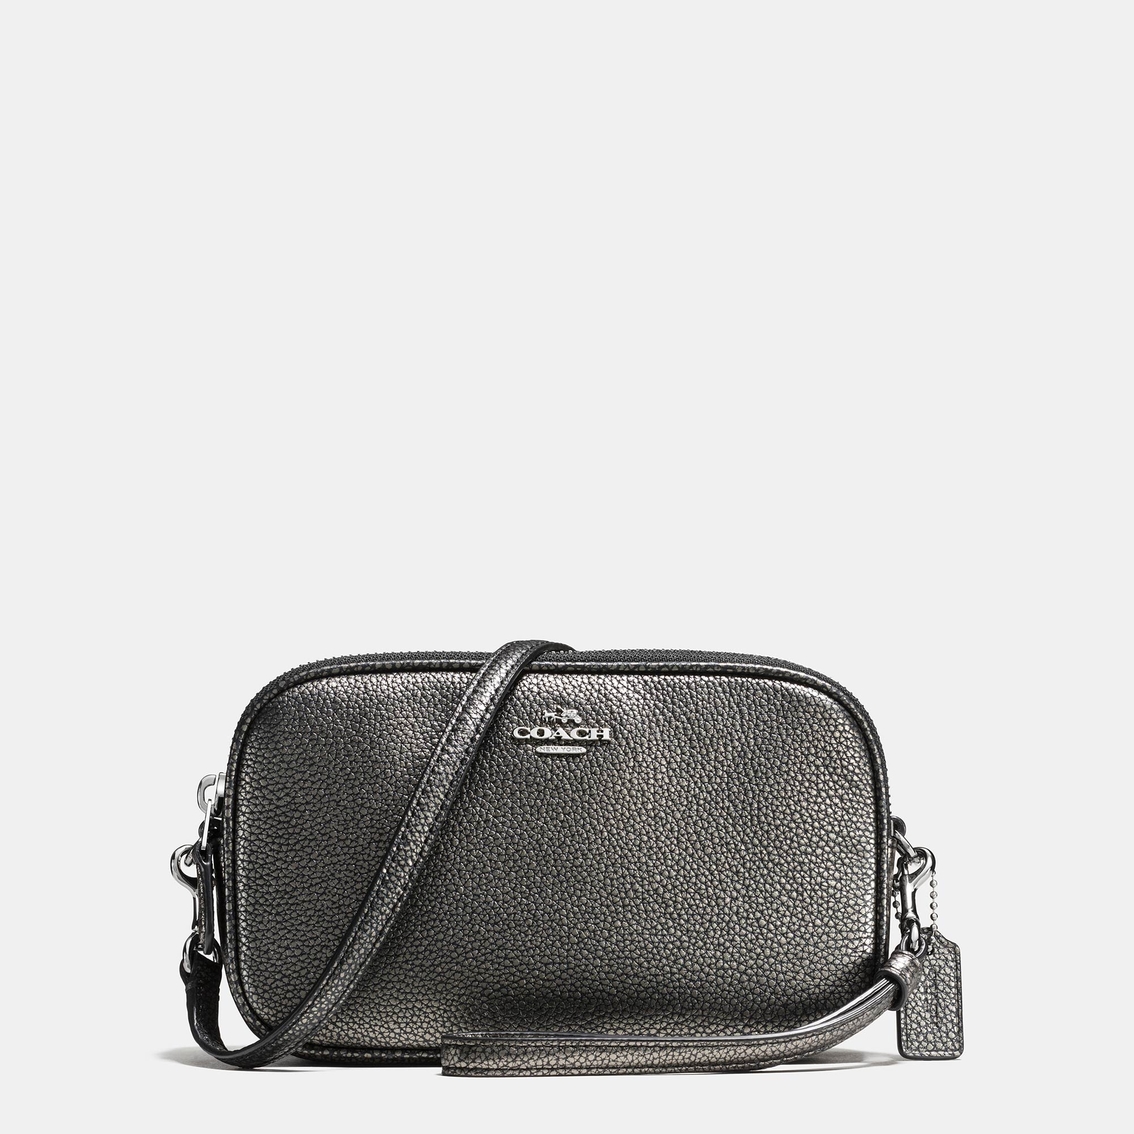 Coach Crossbody Clutch In Pebble Leather | Wristlets, Clutches | Handbags & Accessories | Shop ...